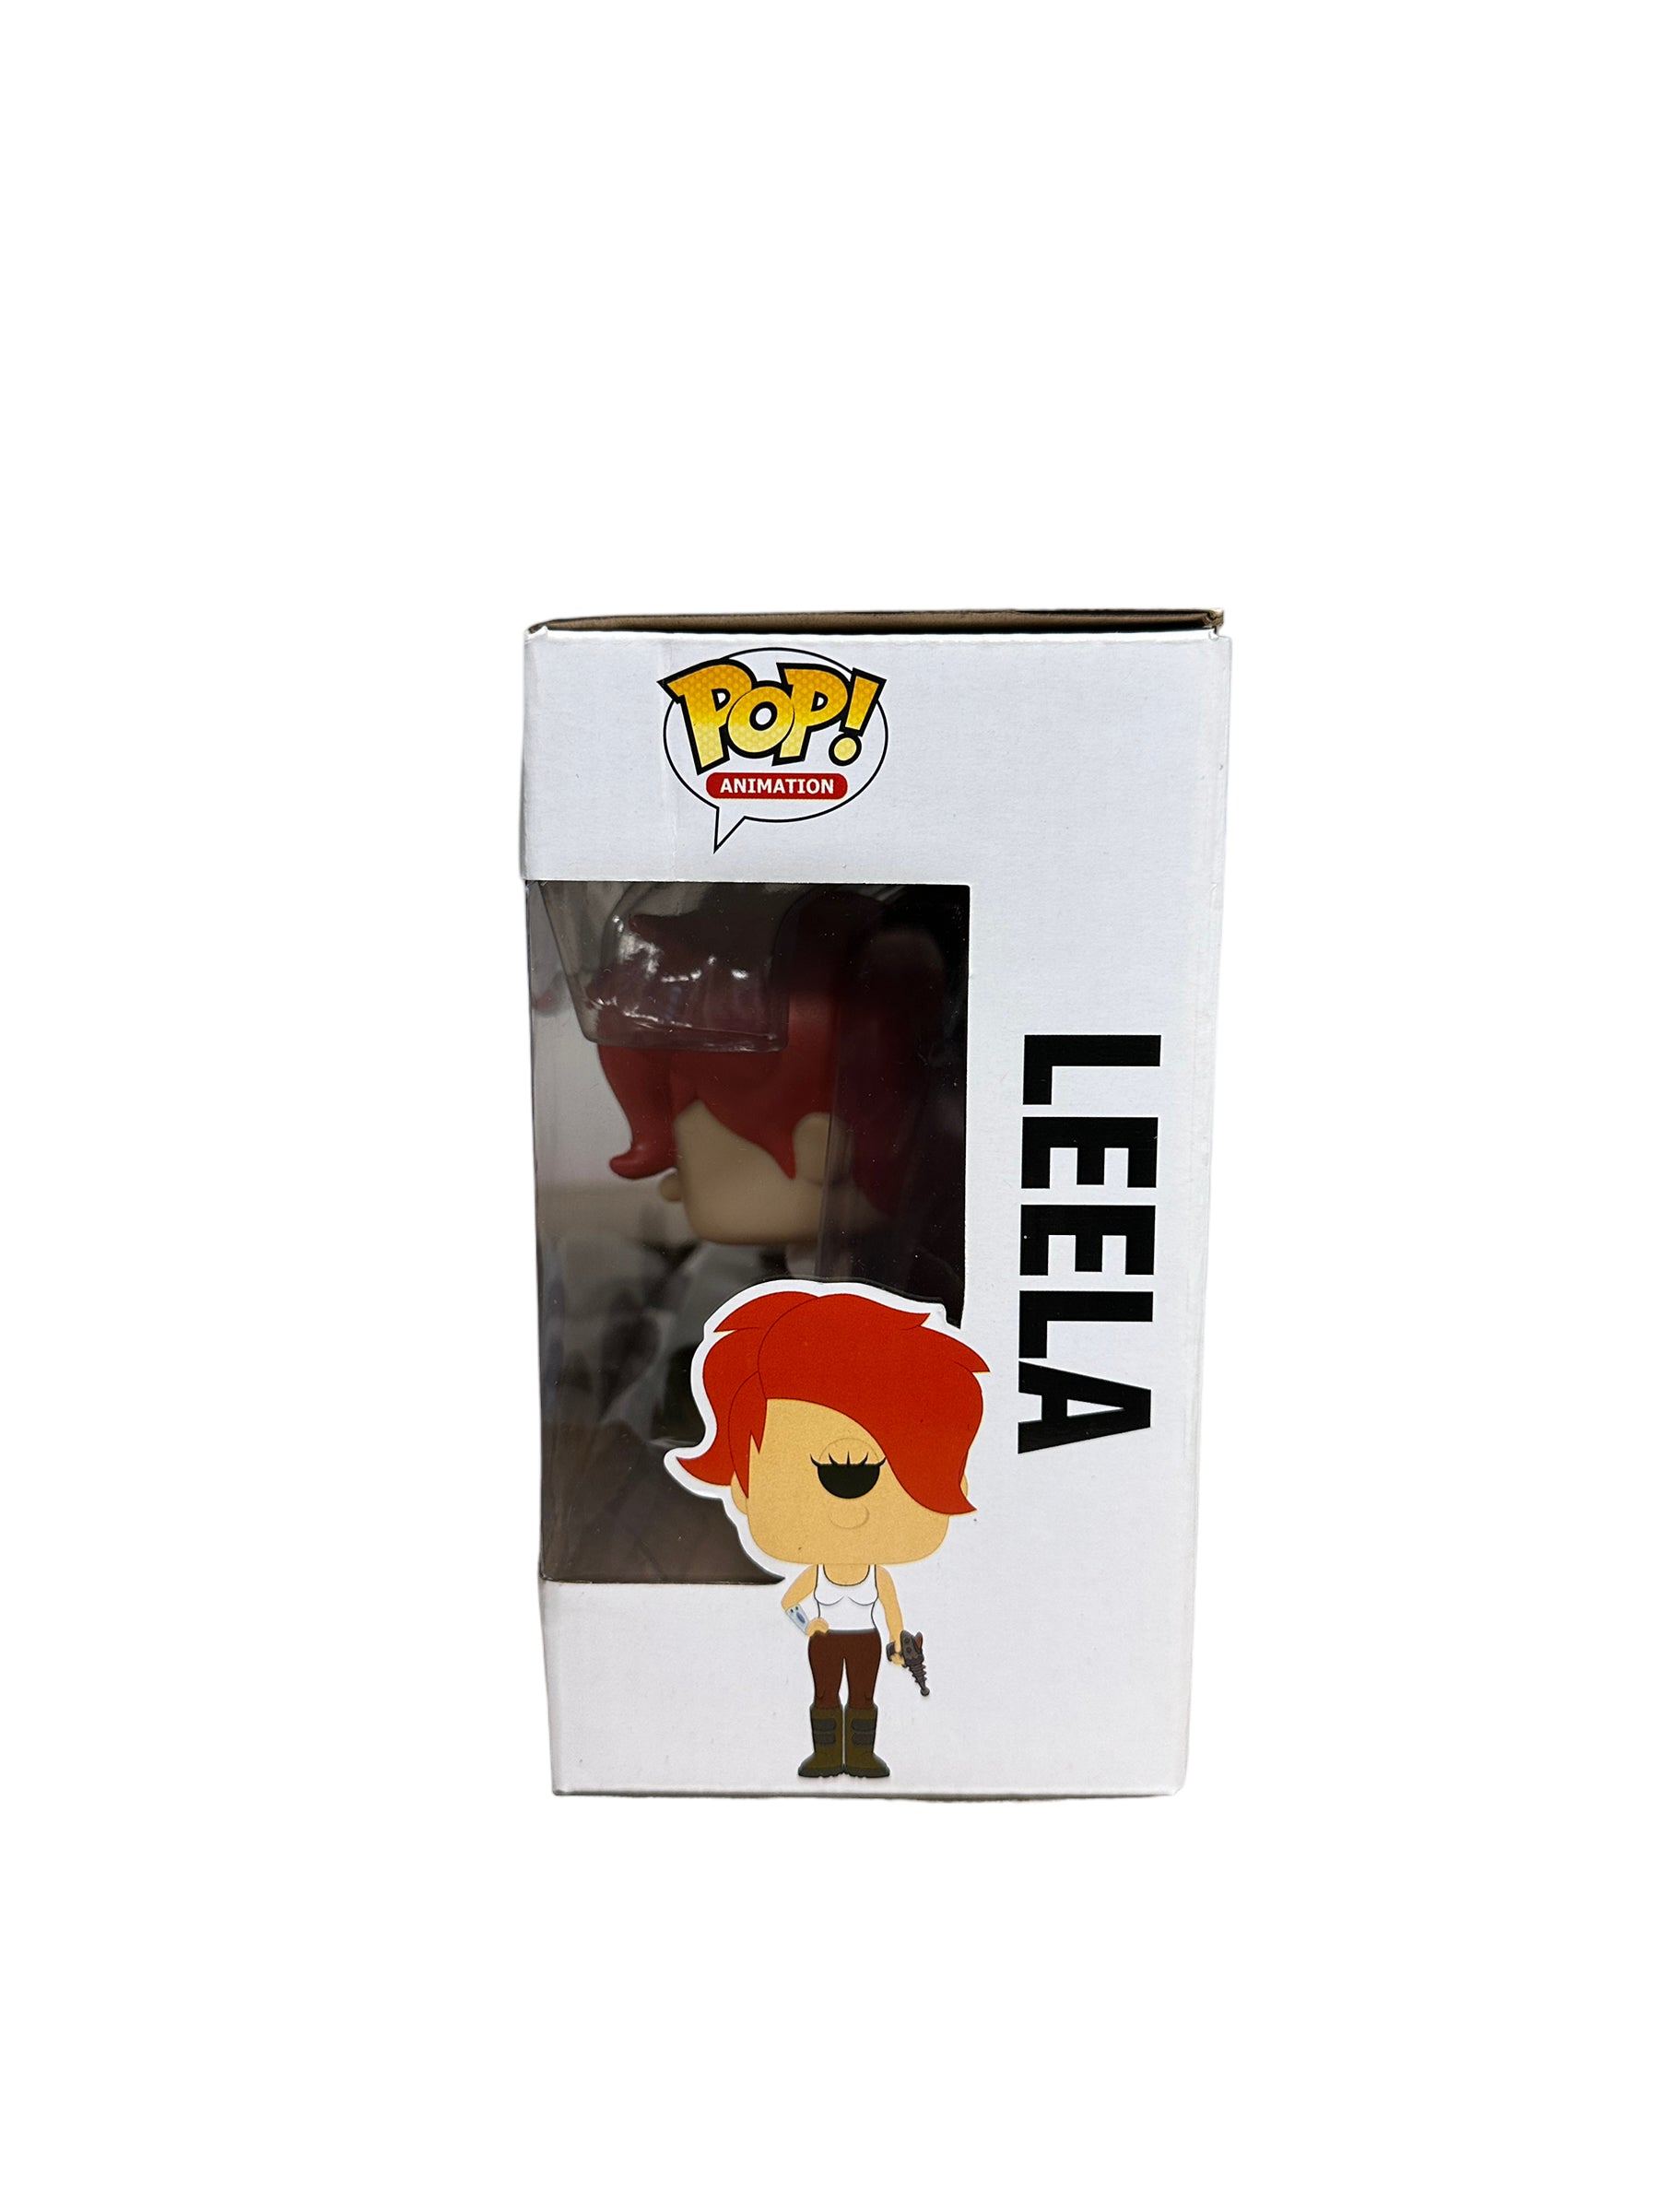 Alternate Universe Fry and Leela 2 Pack Funko Pop! - Futurama - NYCC 2015 Exclusive LE750 Pcs - Condition 8.5/10